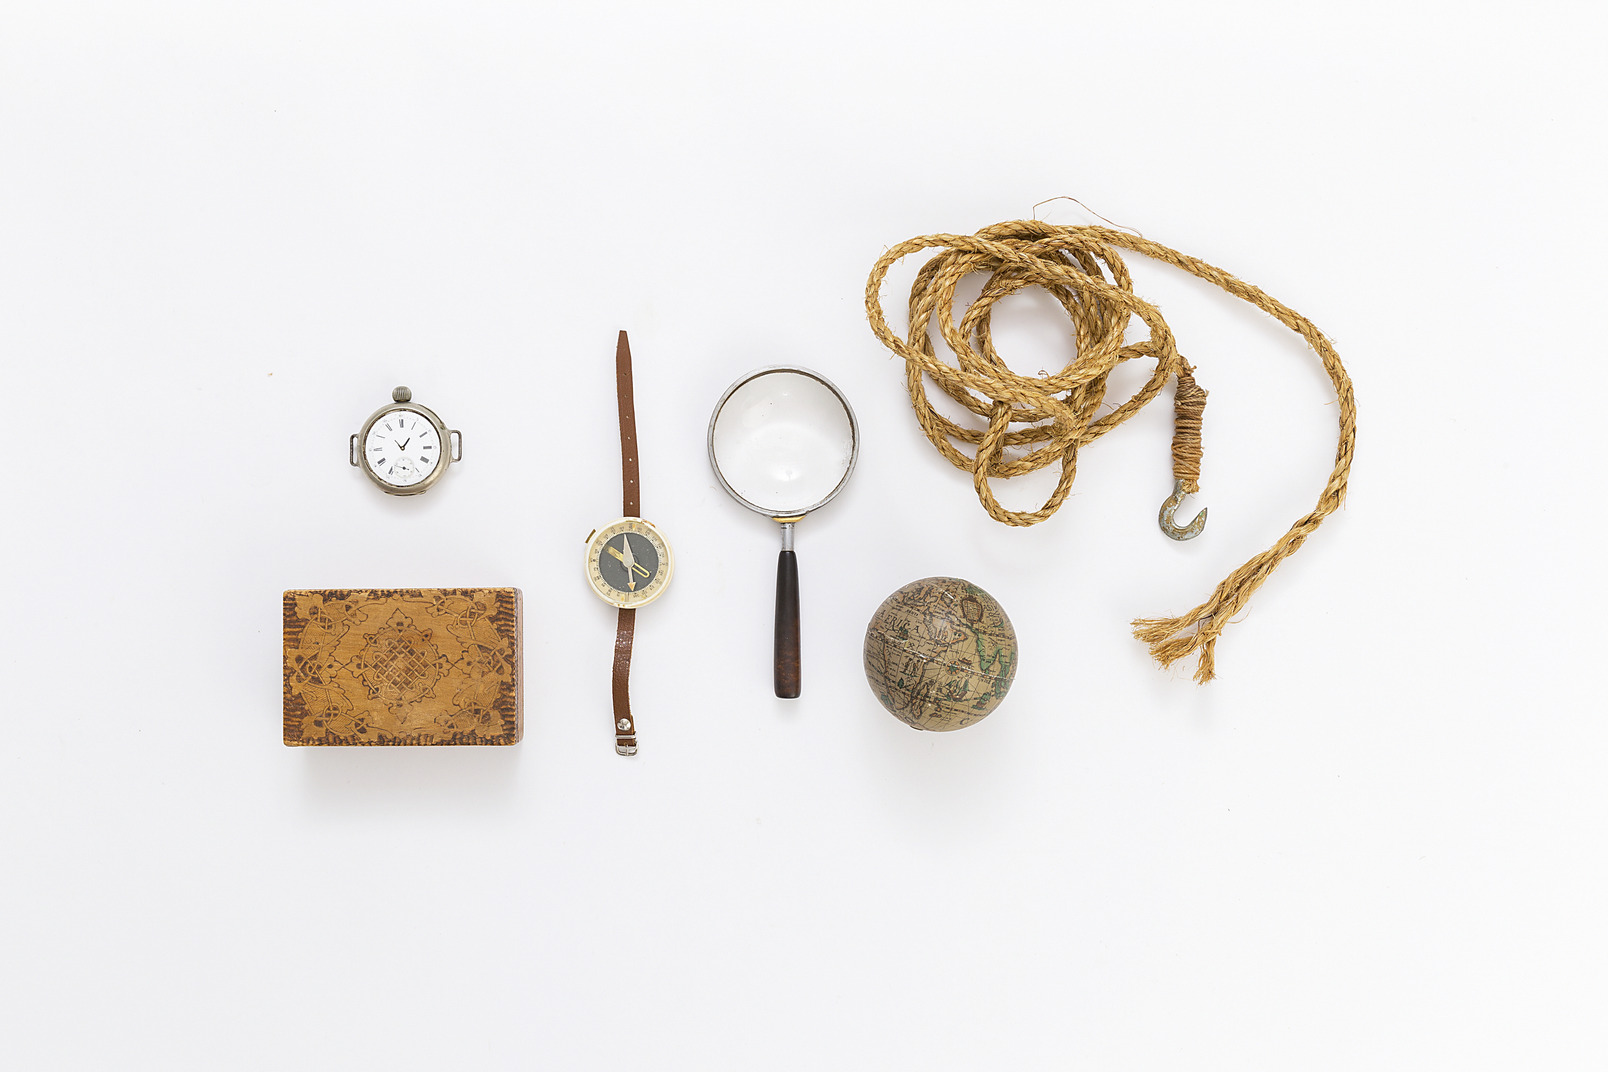 Rope with hook, magnifying glass, mini globe, pocket watch and mini box